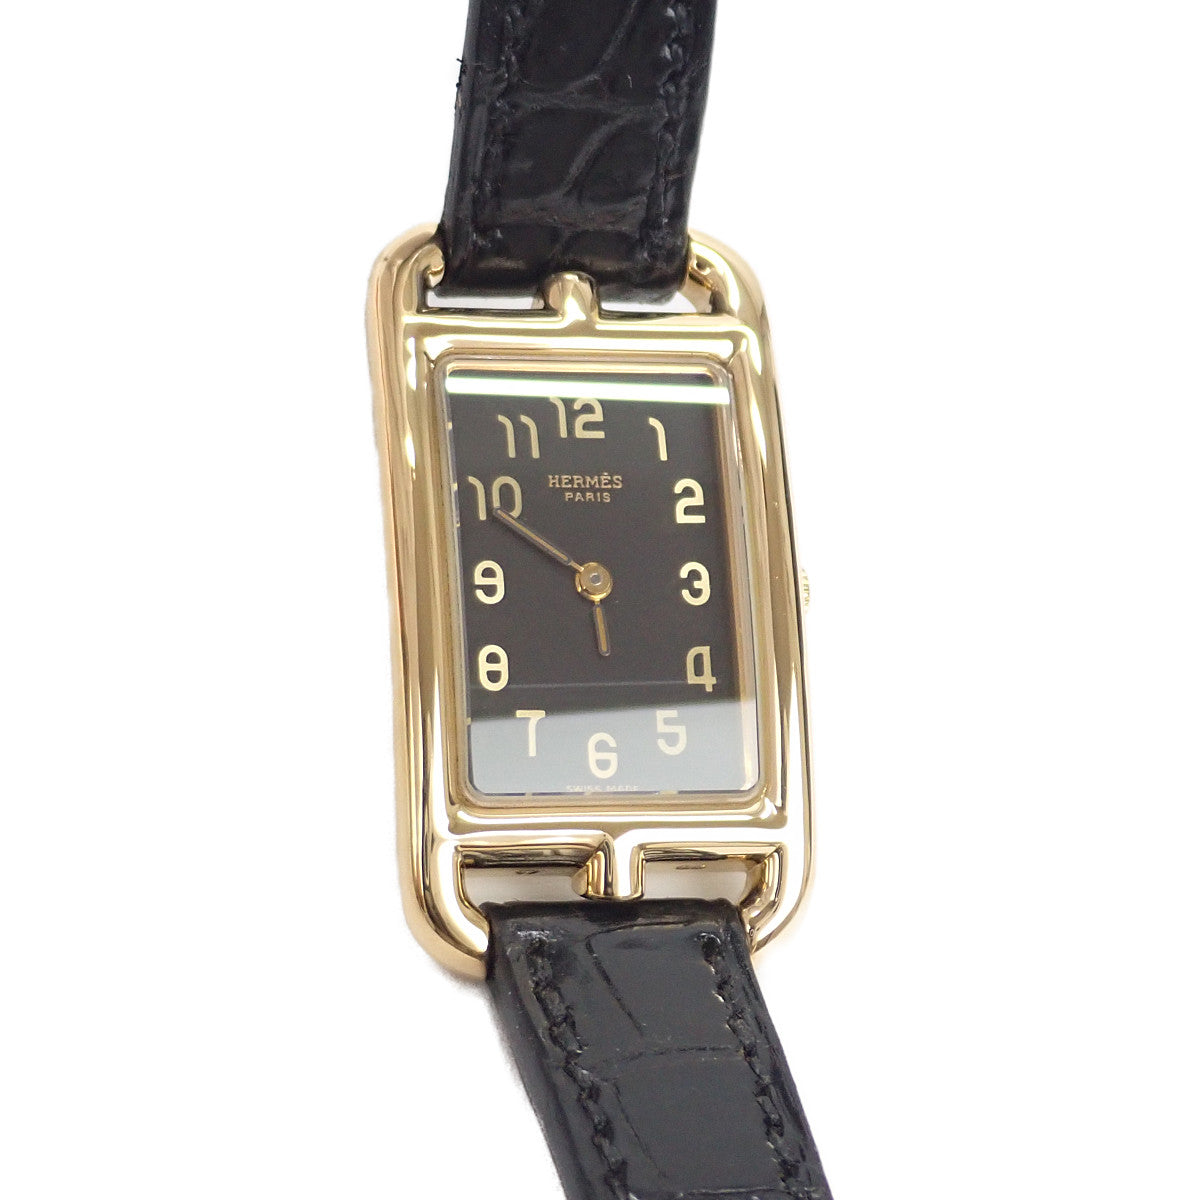 HERMES Nantucket Polosus Women's Wristwatch NA1.285, Black Dial, 18K Yellow Gold/Leather, HERMES Used NA1.285